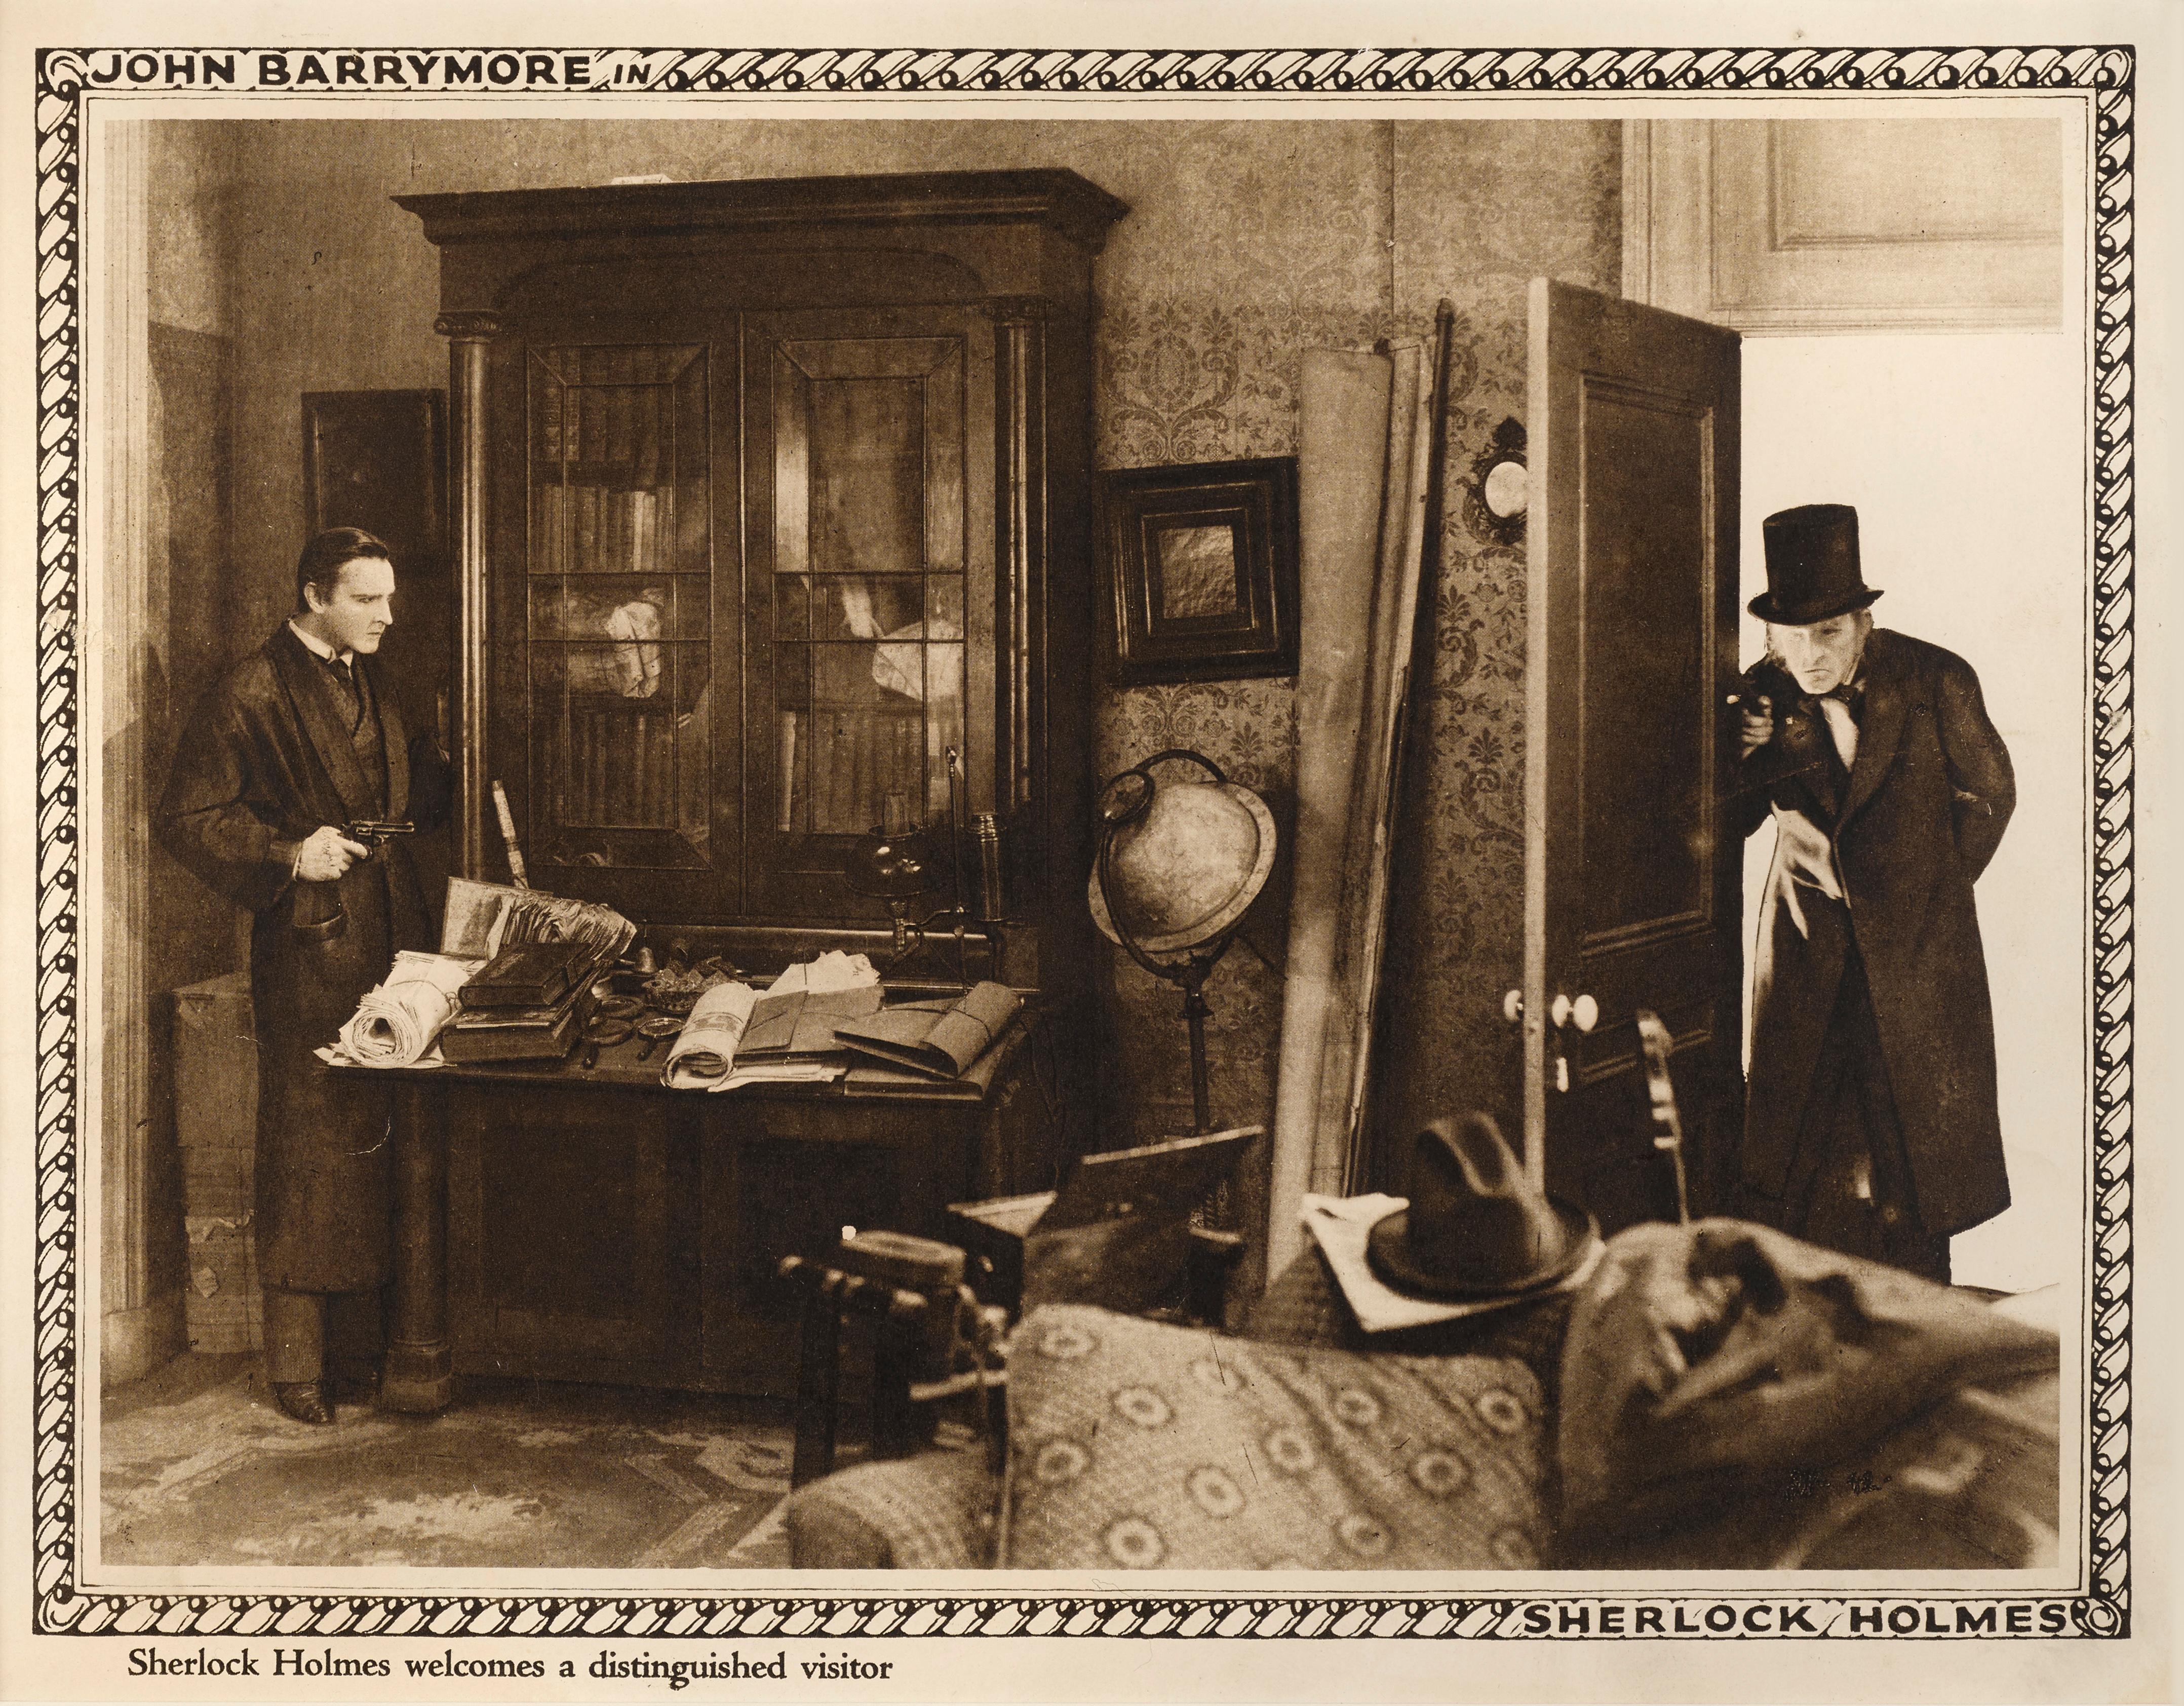 Original 1922 Lobby card from the Silent Sherlock Holmes film starring
John Barrymore, Roland Young. The Lobby card shows Holmes and Moriarty.
The film was directed by Albert Parker.
This lobby card is conservation framed in an obeche wood framed